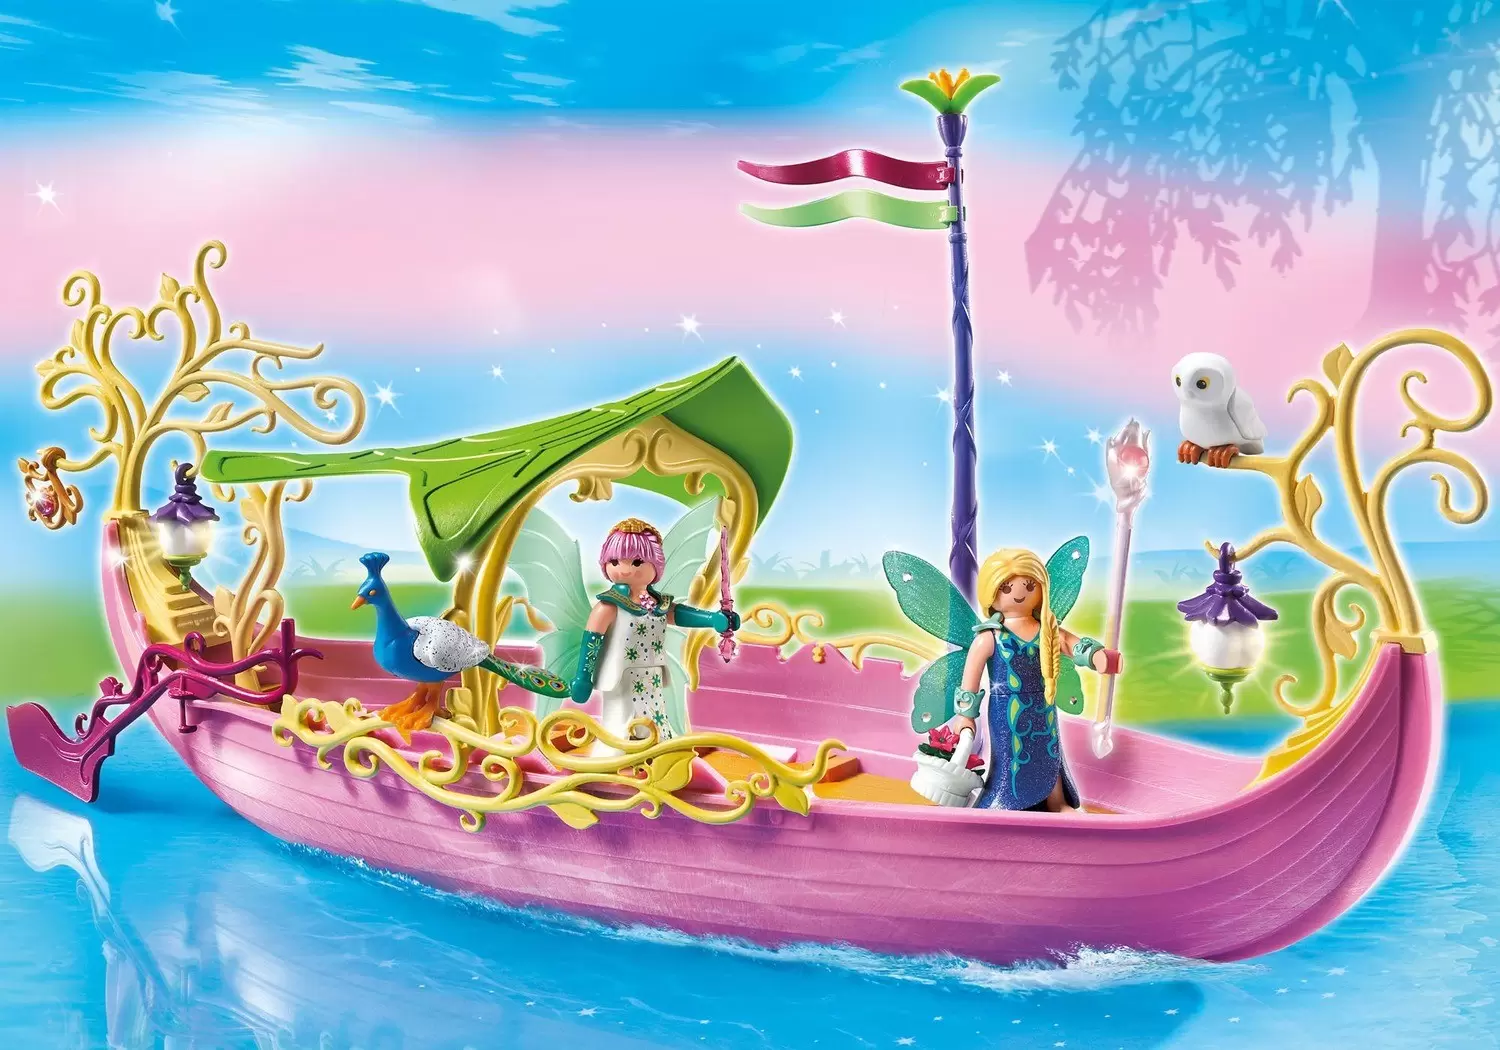 Playmobil Fairies - Queen of the Fairies enchanted boat